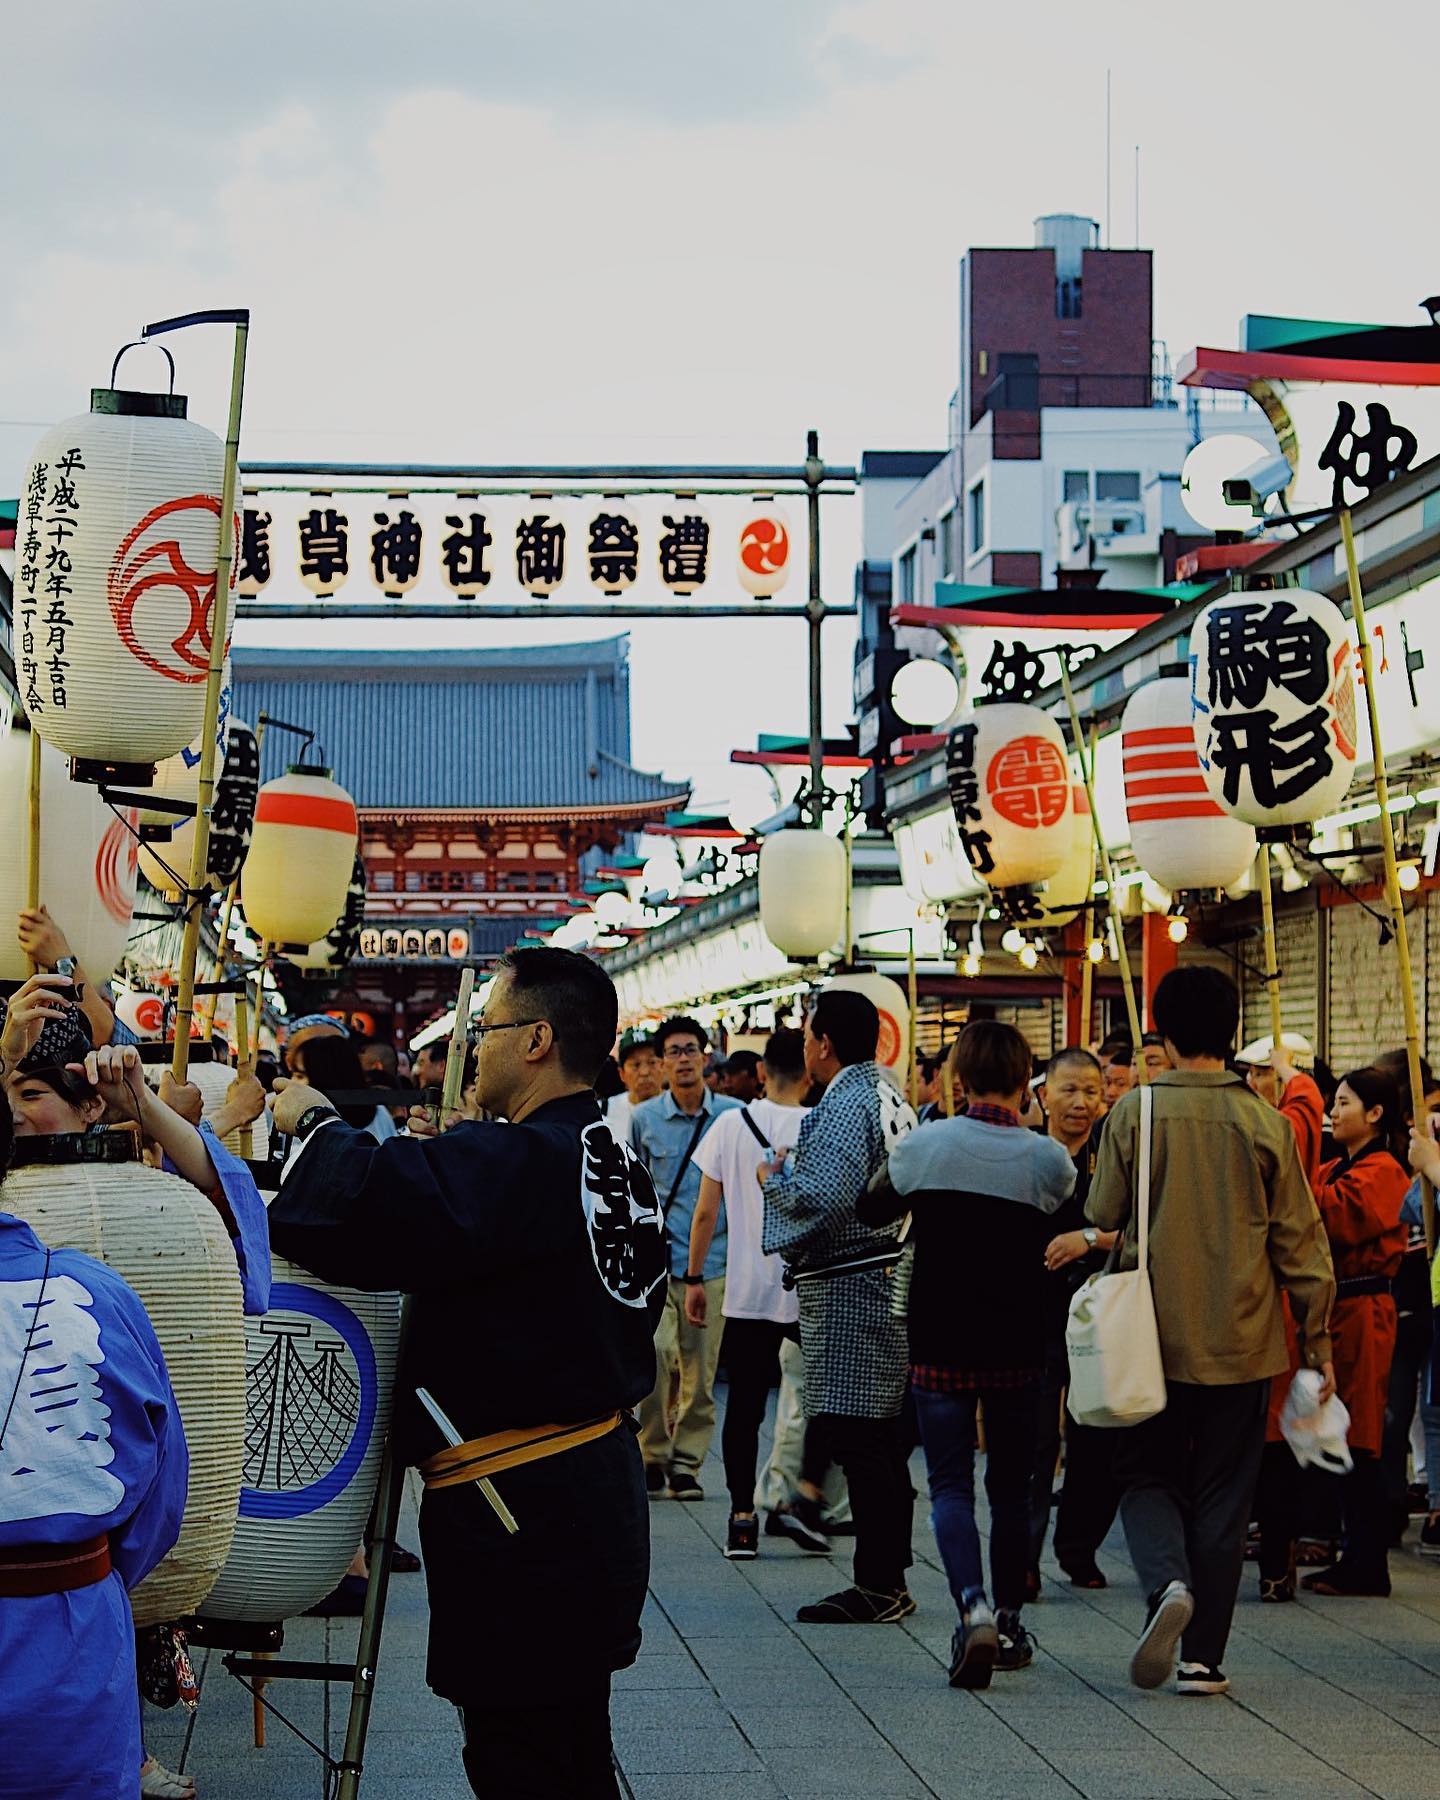 This week's update from AOI Global: Sanja-matsuri, Asakusa, Tokyo﻿﻿
﻿
﻿
"Sanja-Matsuri" is held in the middle of May every year.　It is one of the three major festivals held in Tokyo!! ﻿
﻿
﻿
﻿
#filmmakersworld﻿﻿﻿ ﻿ ﻿﻿ ﻿﻿ ﻿ #festival﻿ #whenintokyo﻿